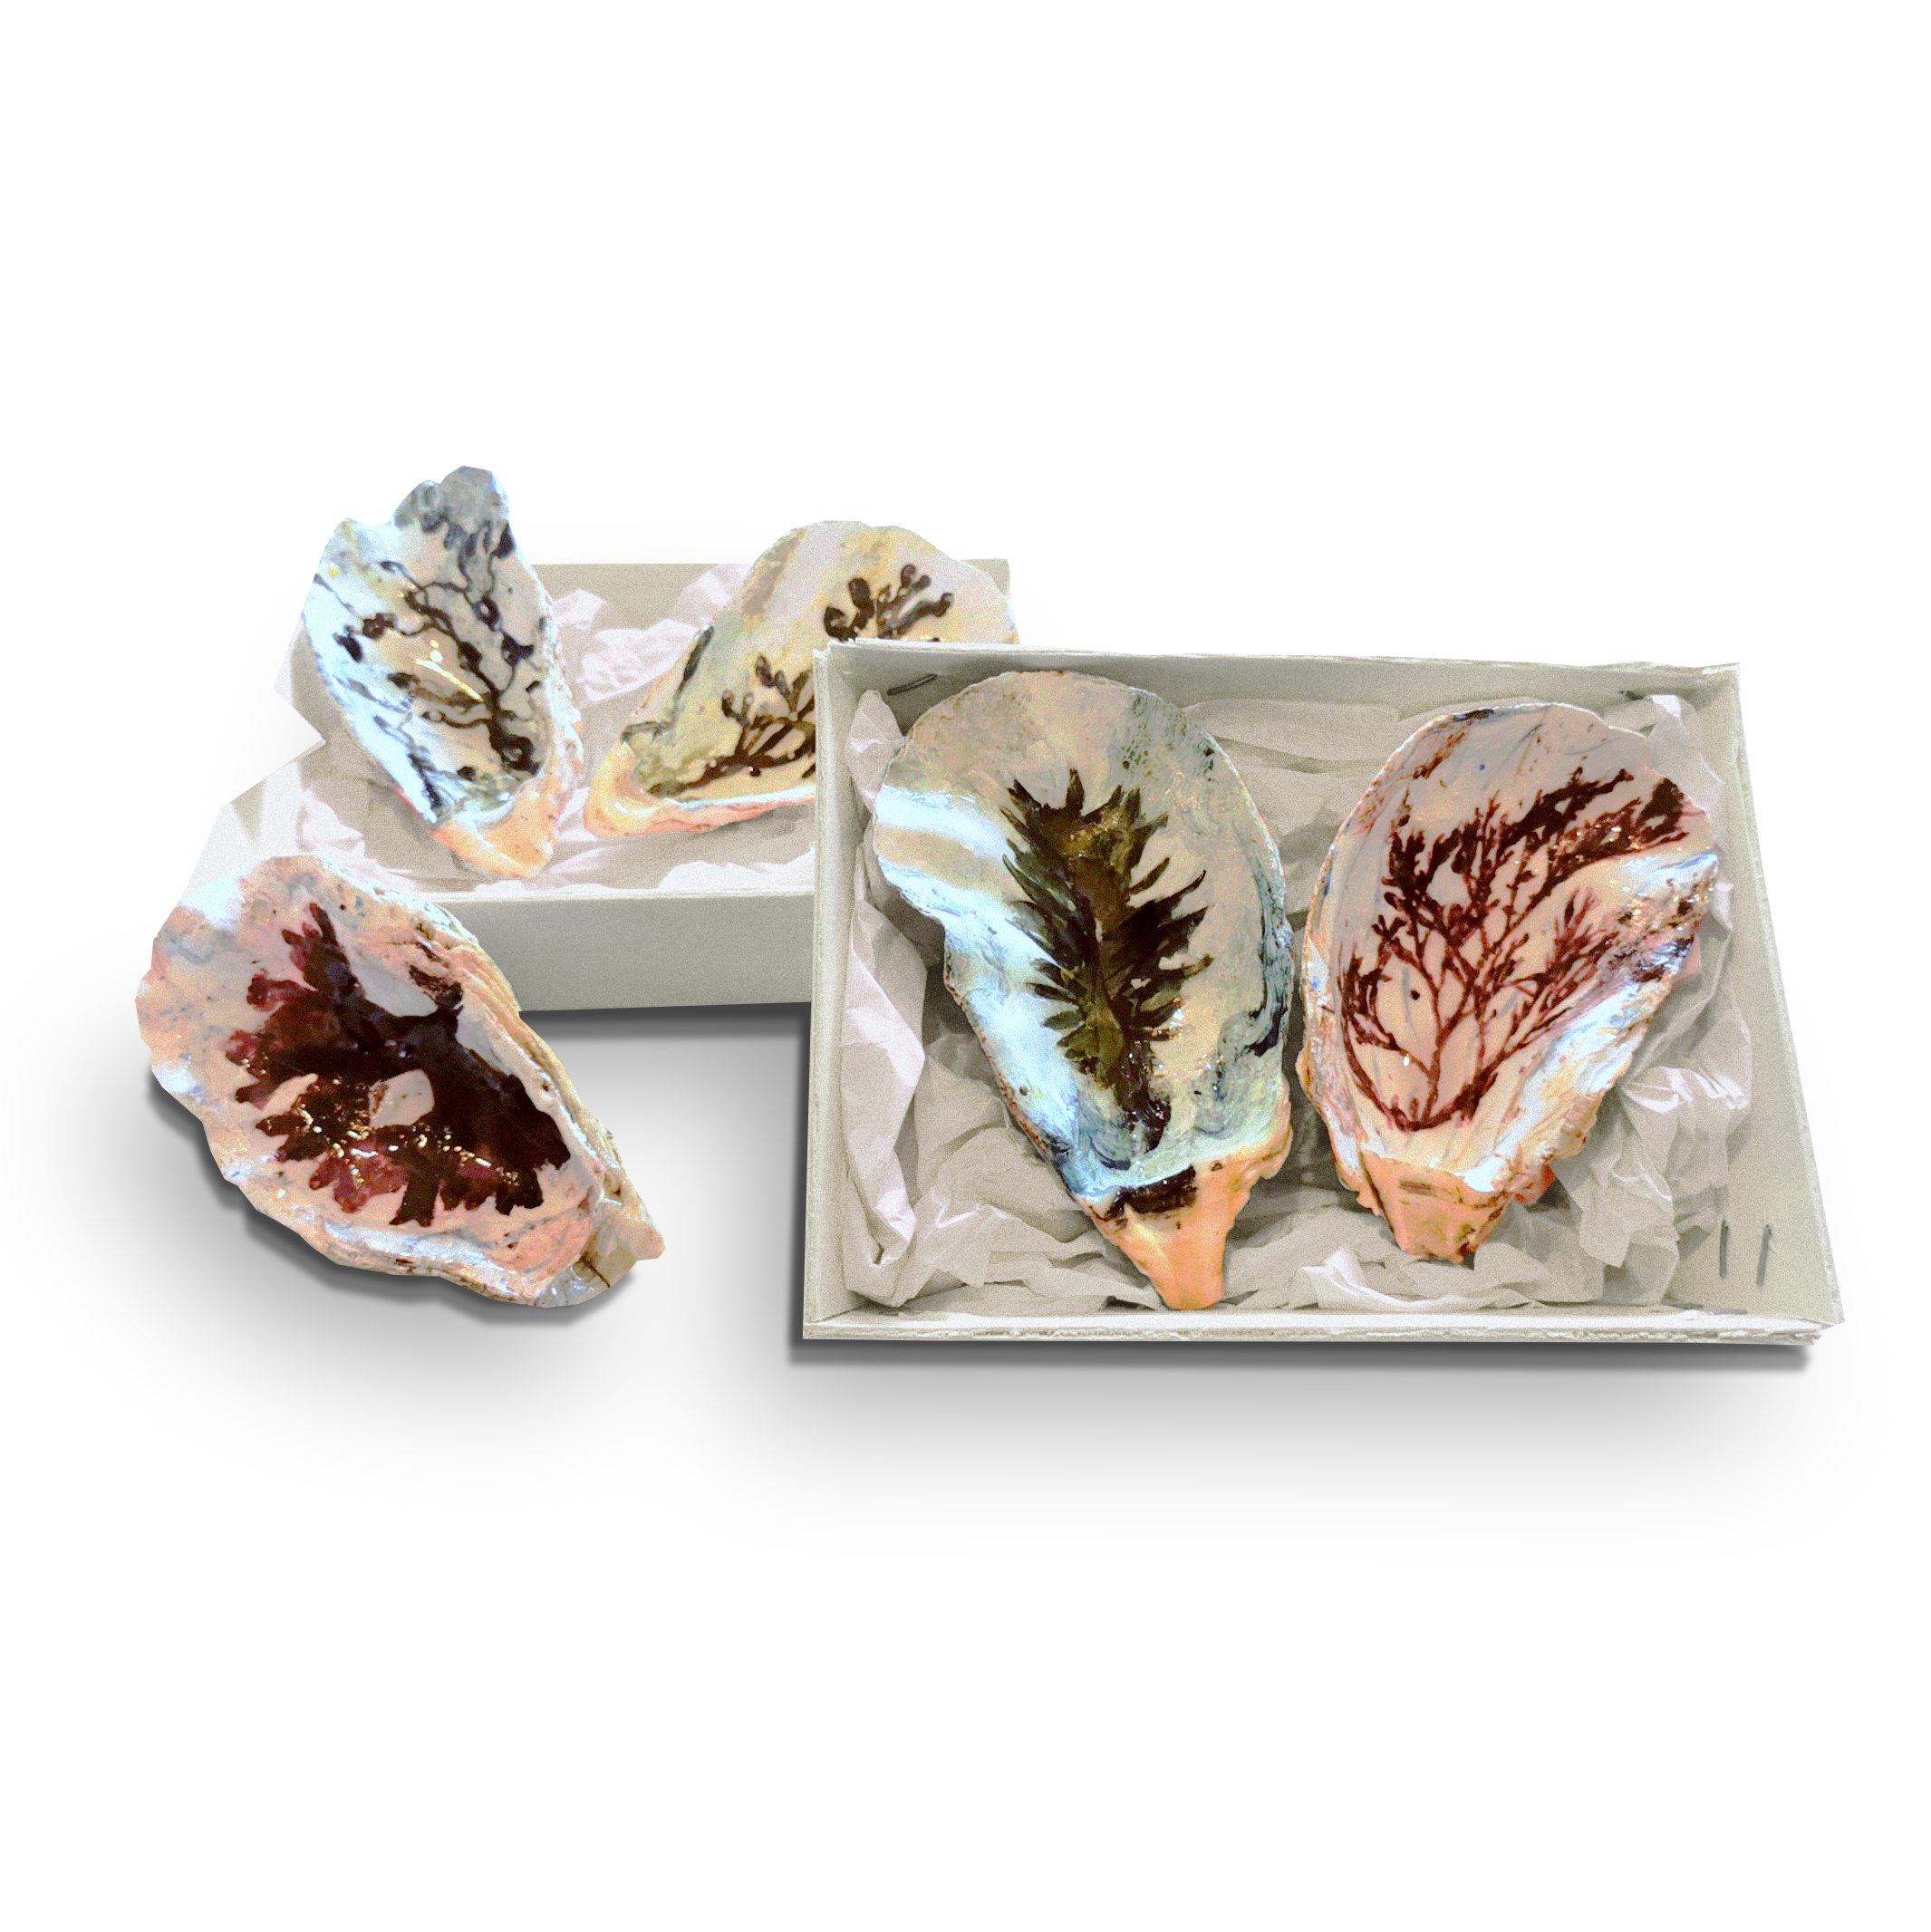 Oyster shell plate